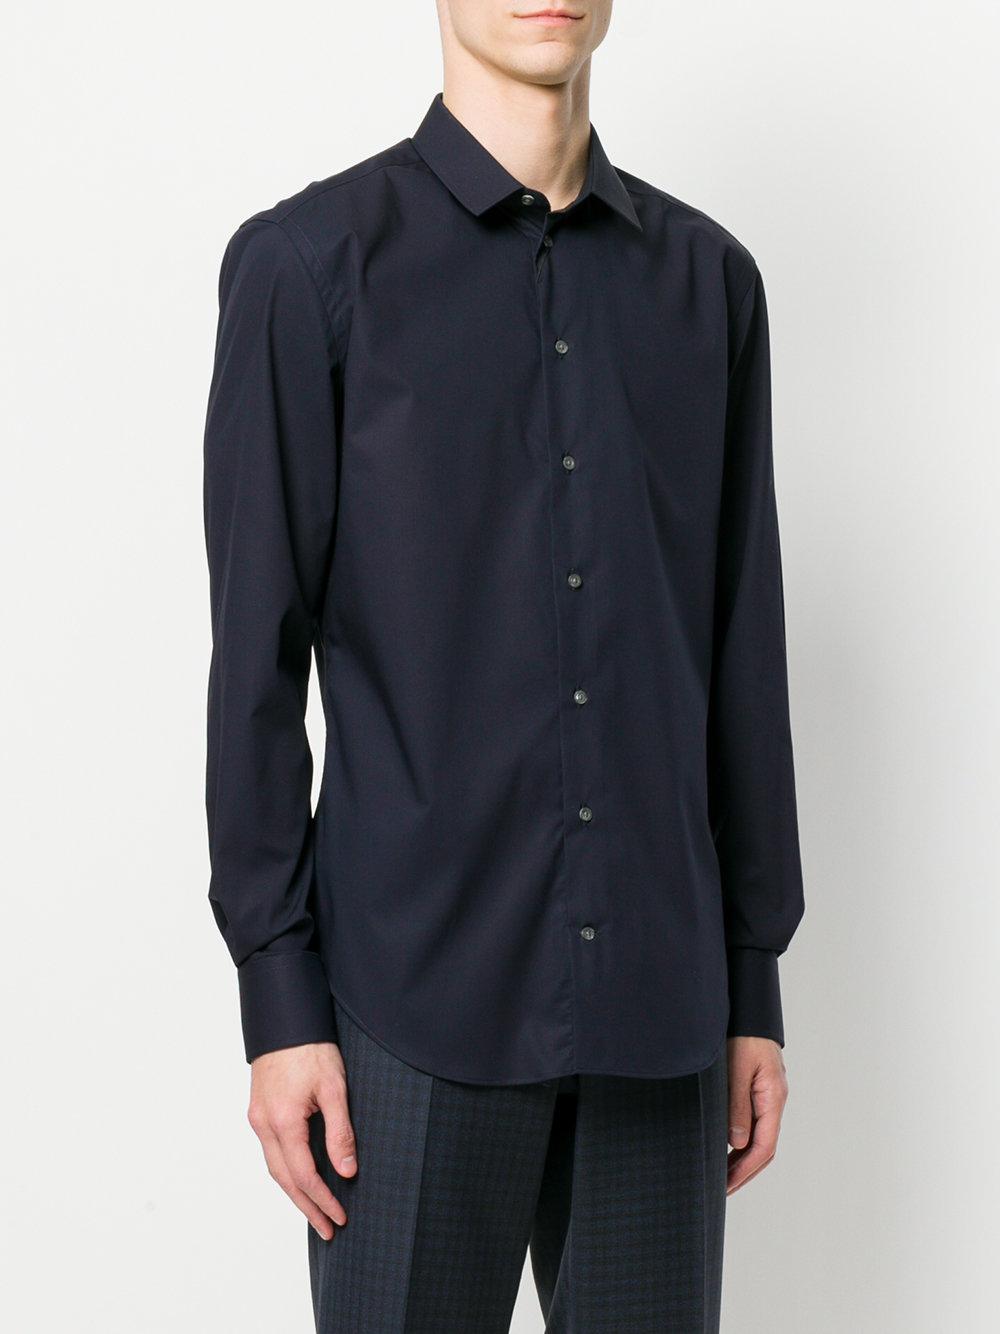 Lyst - Emporio Armani Curved Hem Shirt in Blue for Men